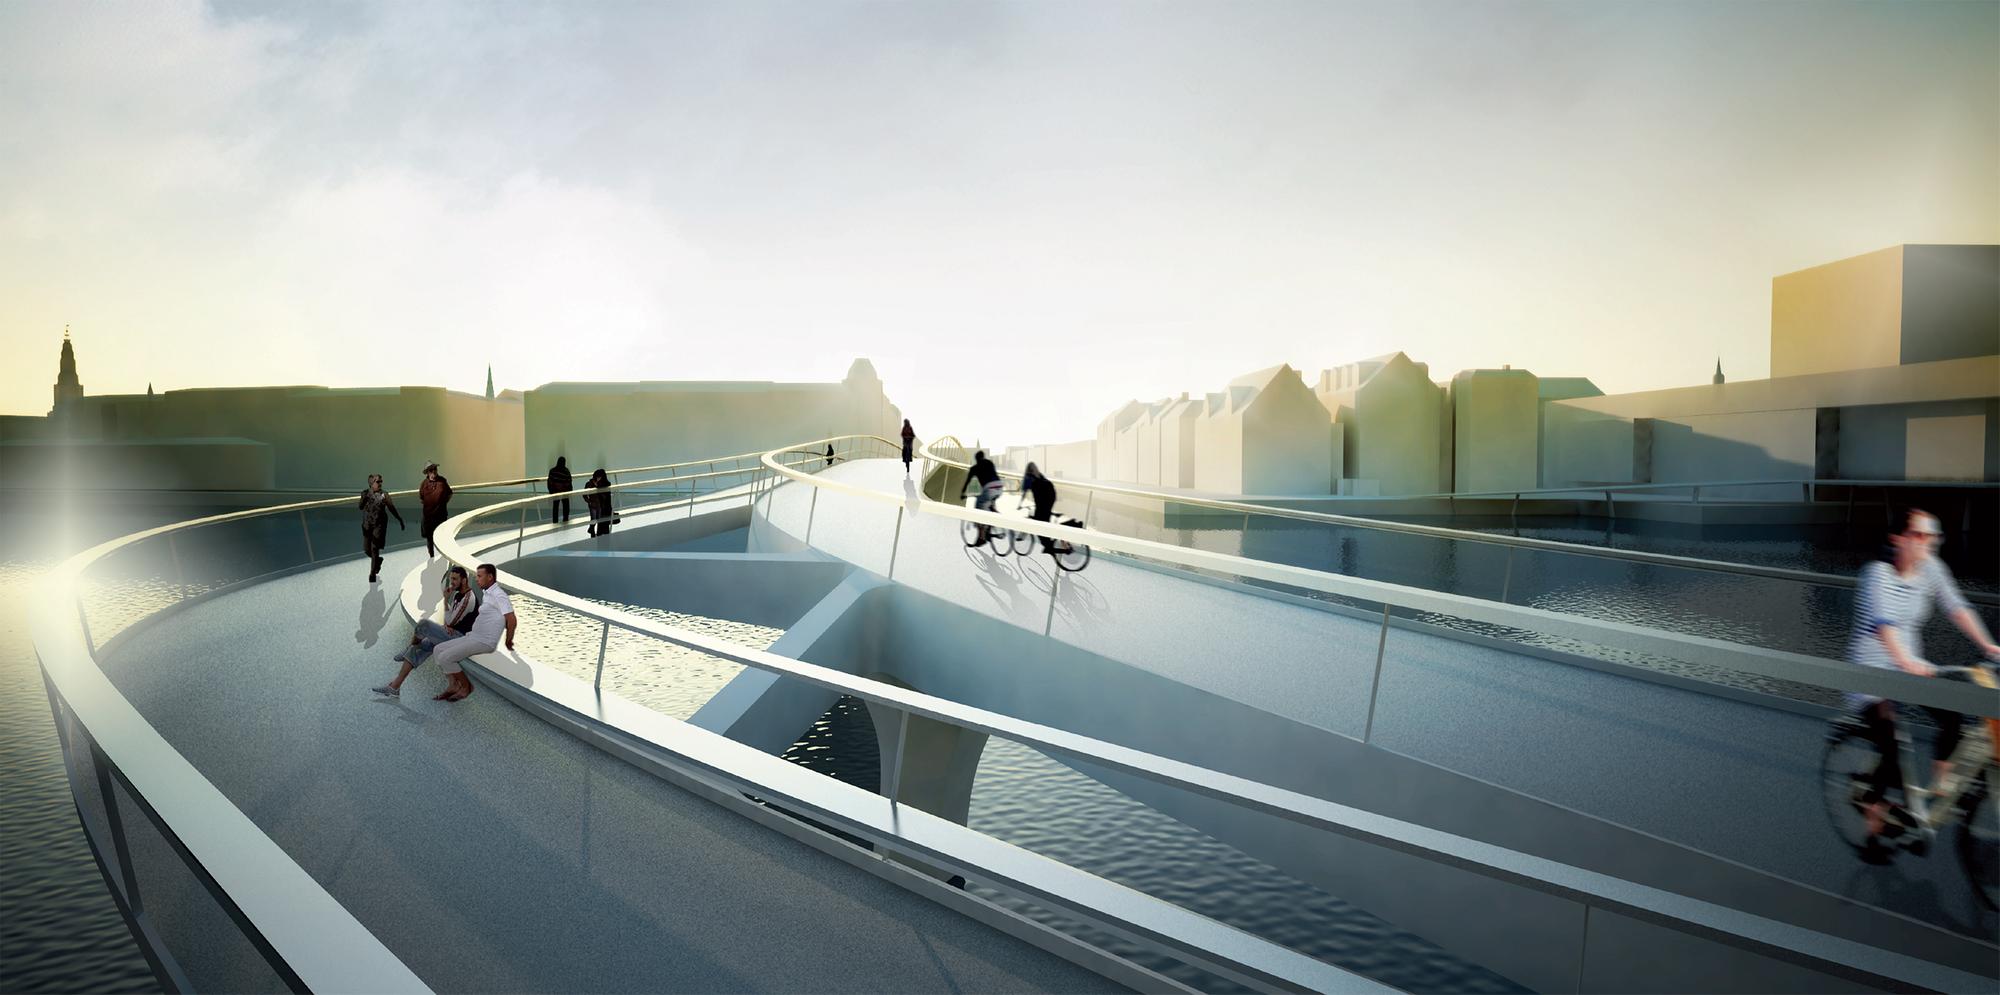 Design for pedestrian and cycle bridge